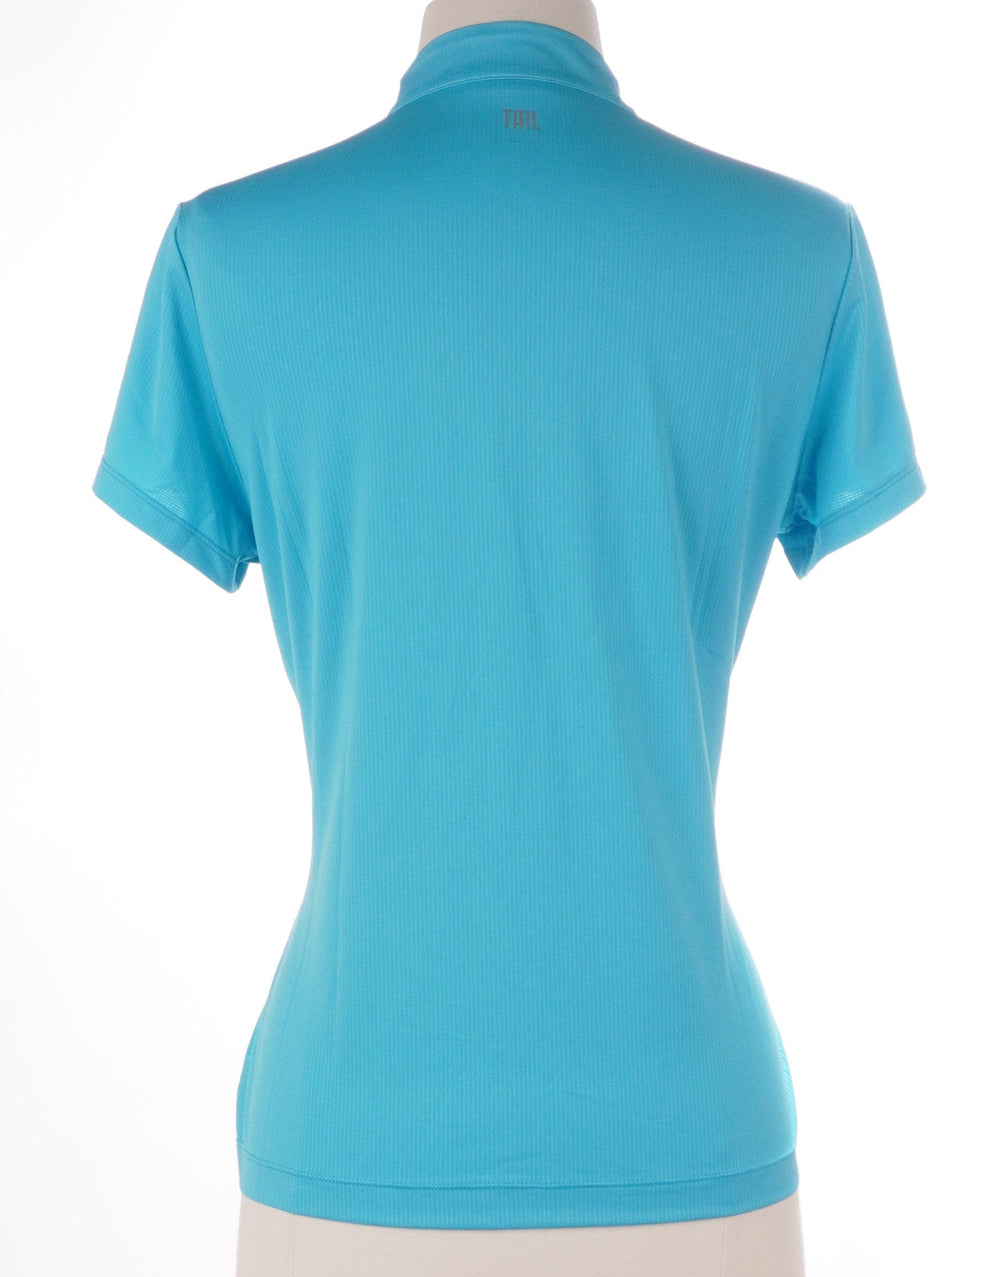 Tail Blue / Small / Exclusive New Product Tail Short Sleeve Top - Oceana - Size Small